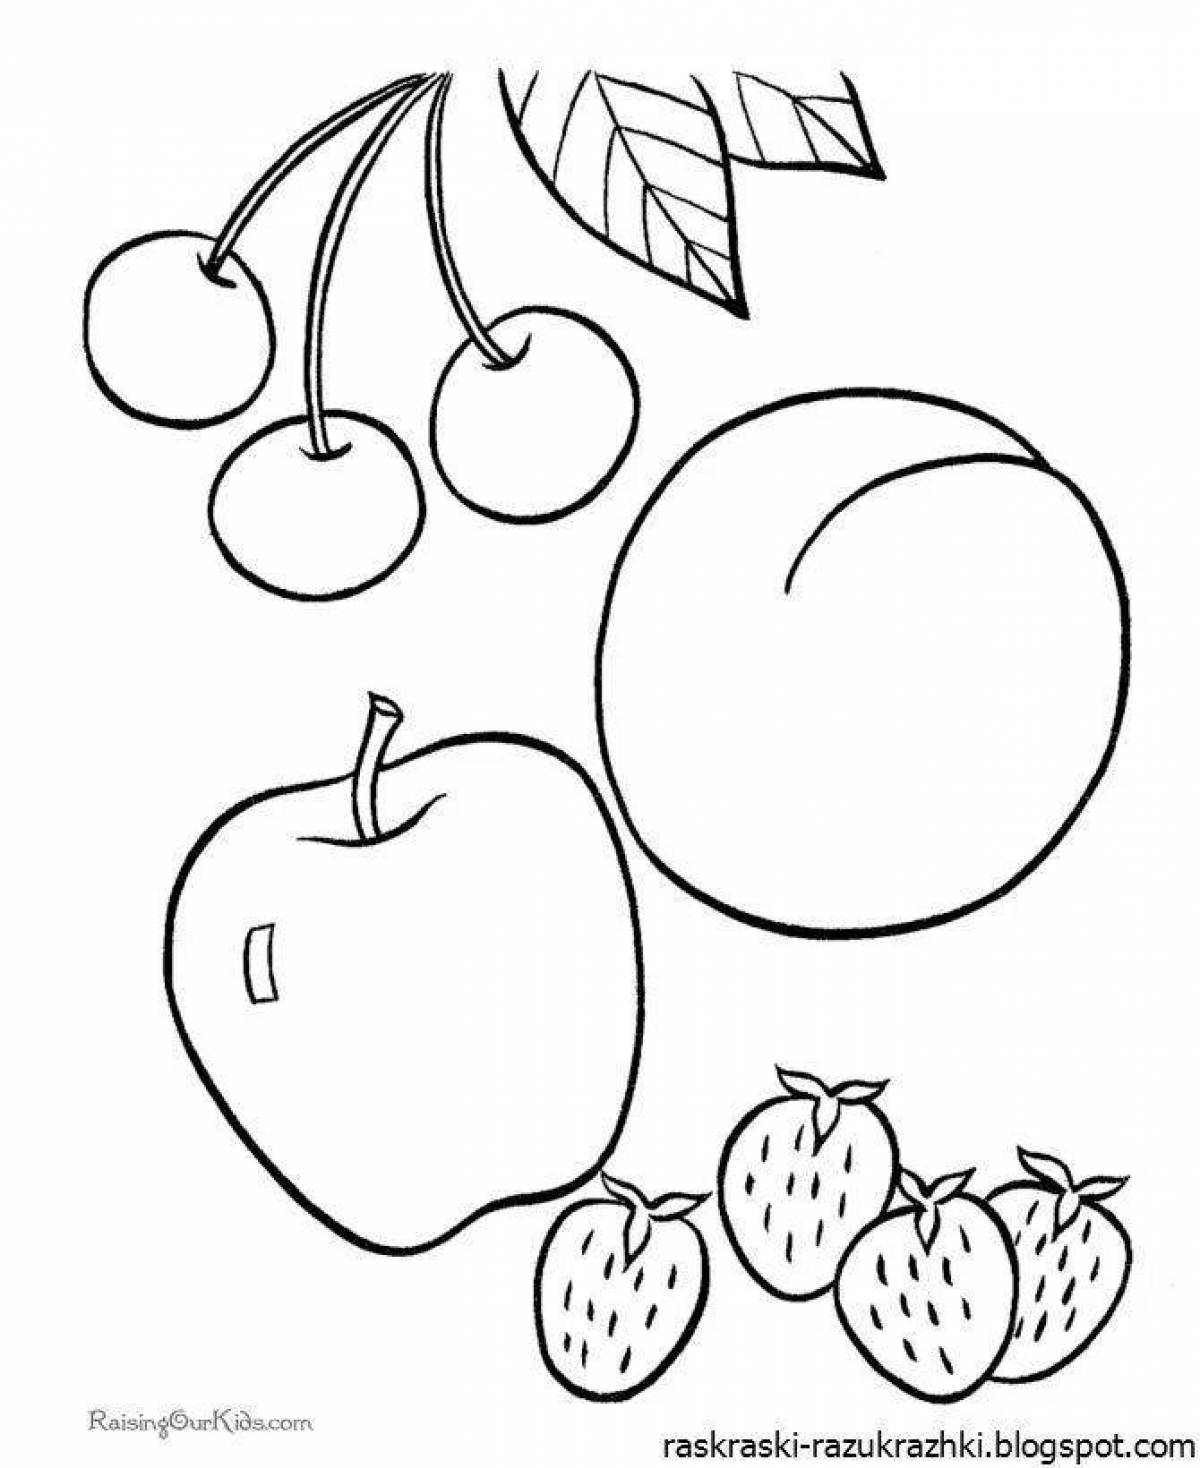 Colored fruit coloring book for 2-3 year olds